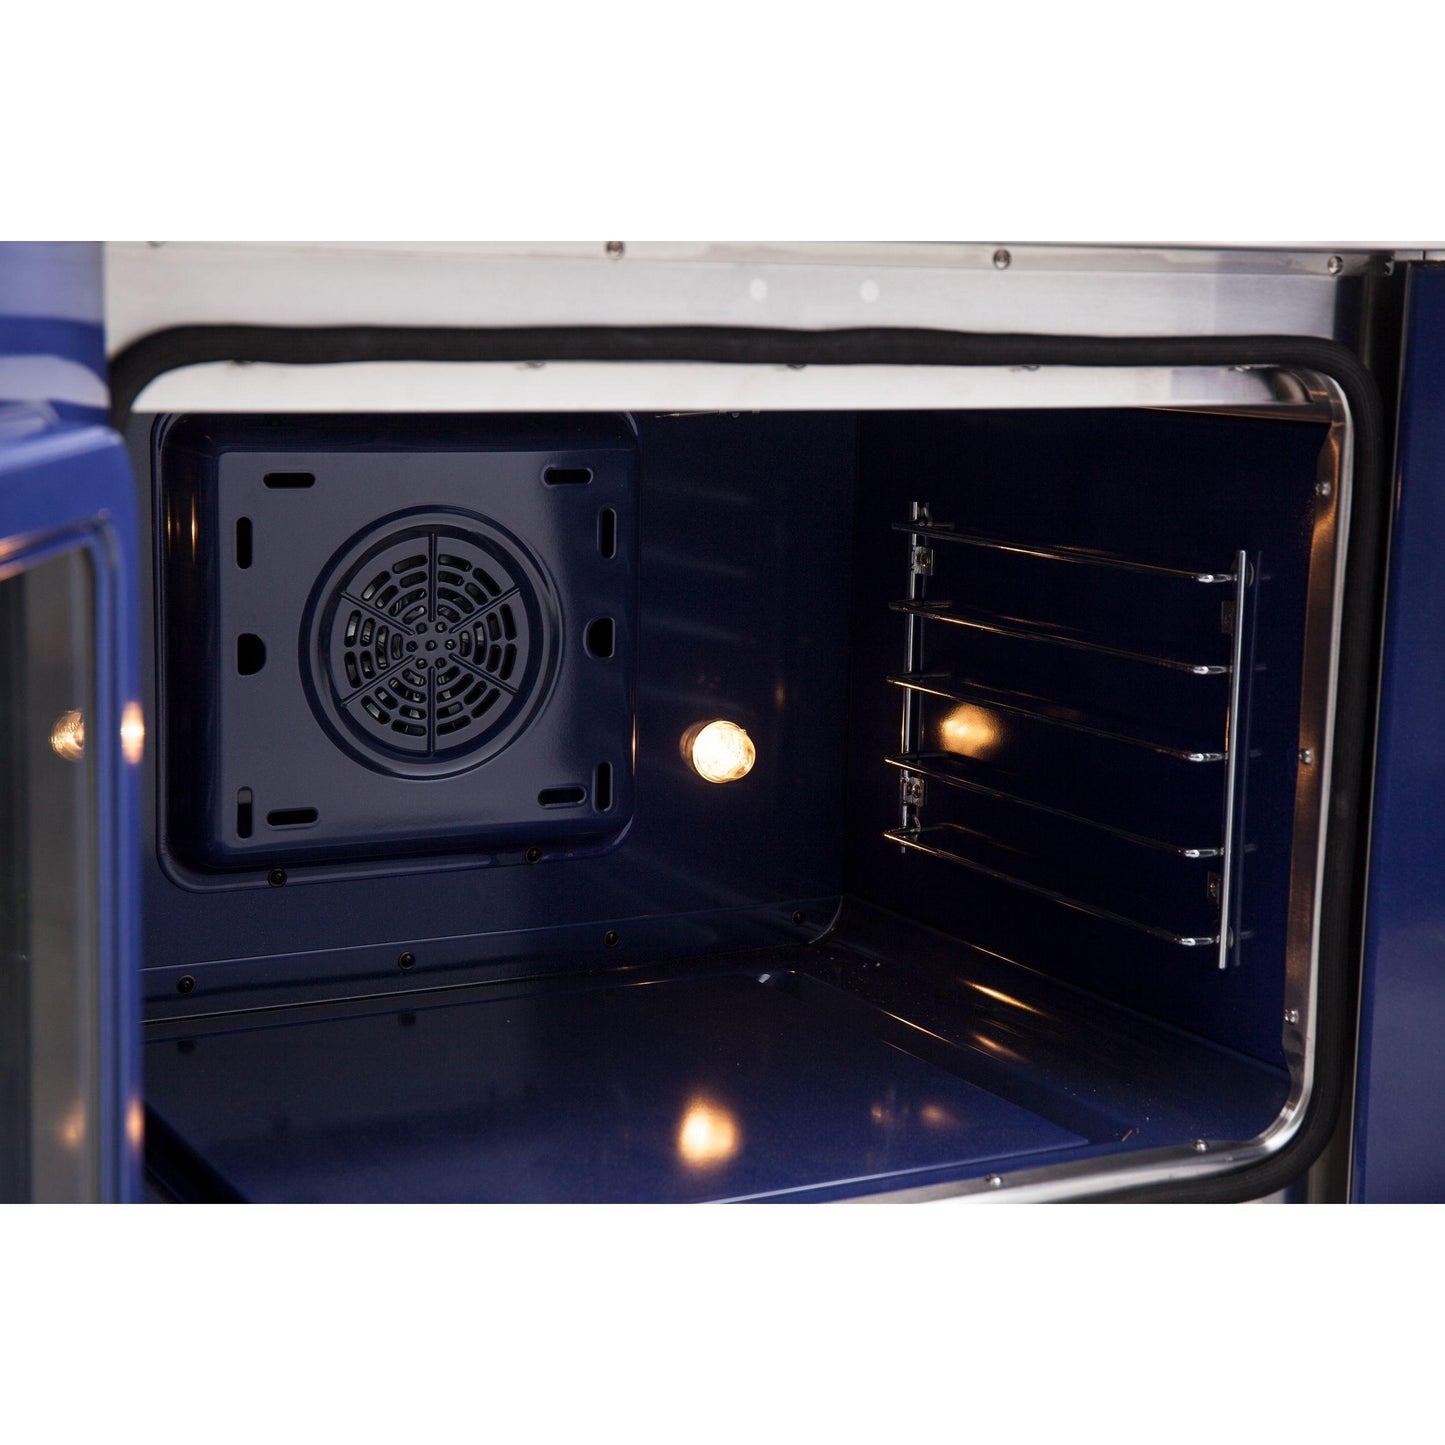 Forno FFSEL695530 Forno Massimo 30" Freestanding French Door Electric Range